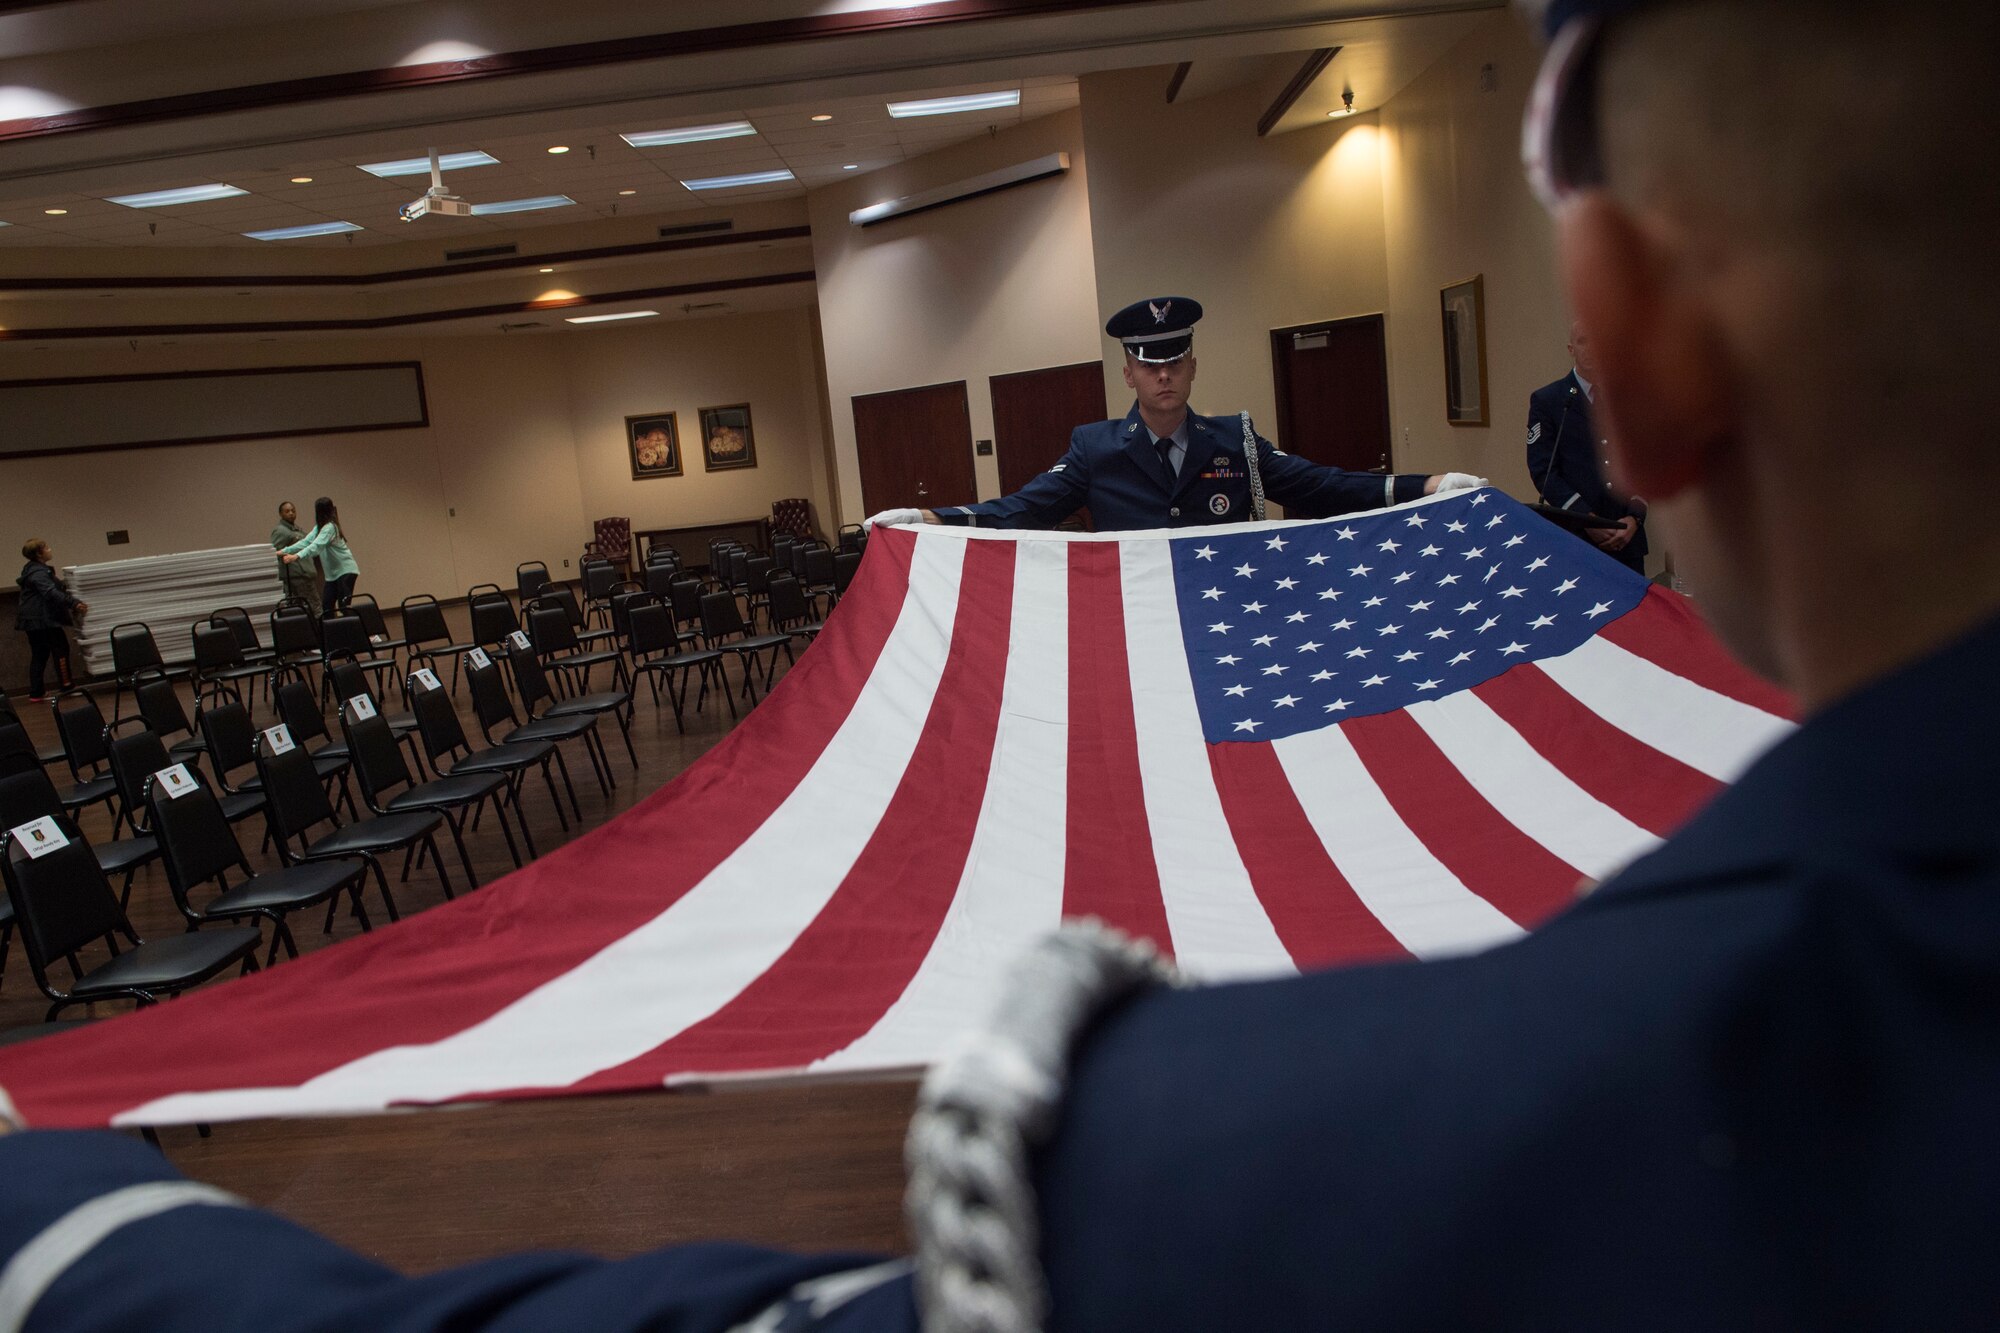 U.S. Air Force Airmen assigned to the 97th Air Mobility Wing Honor Guard team, fold the U.S. flag during a practice ceremony, Oct. 19, 2018, at Altus Air Force Base, Okla.